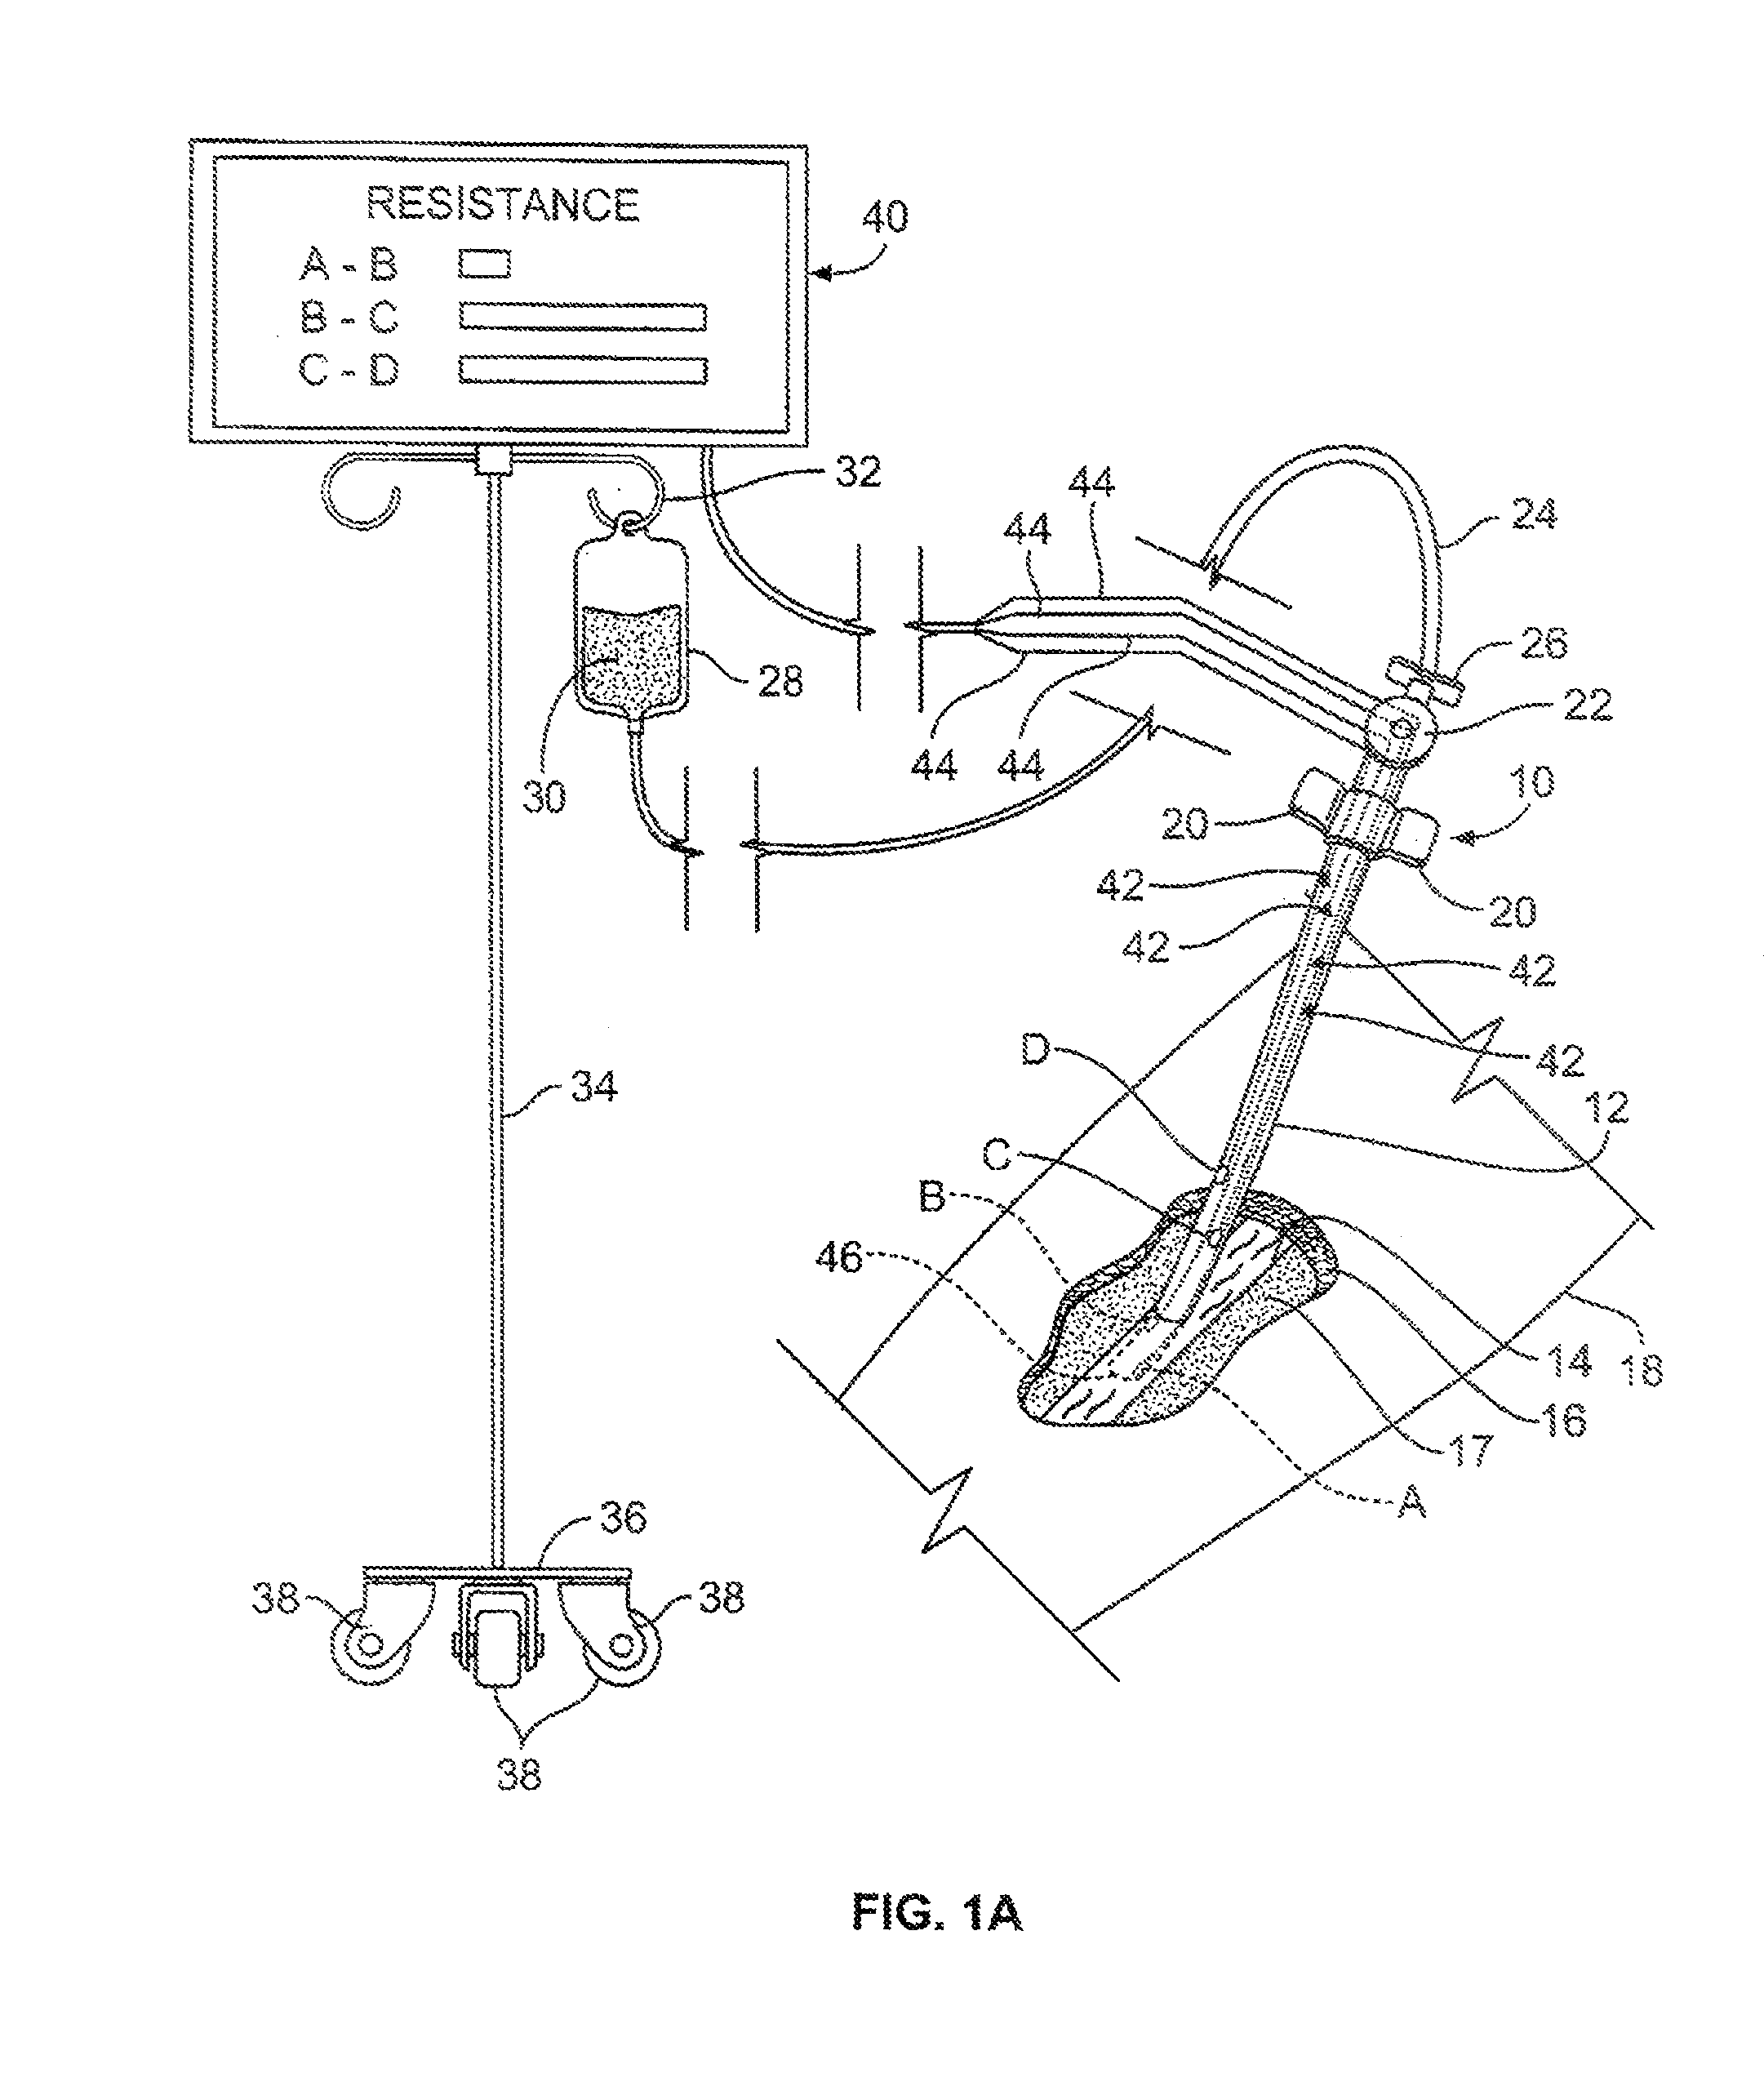 Apparatus and method for monitoring catheter insertion